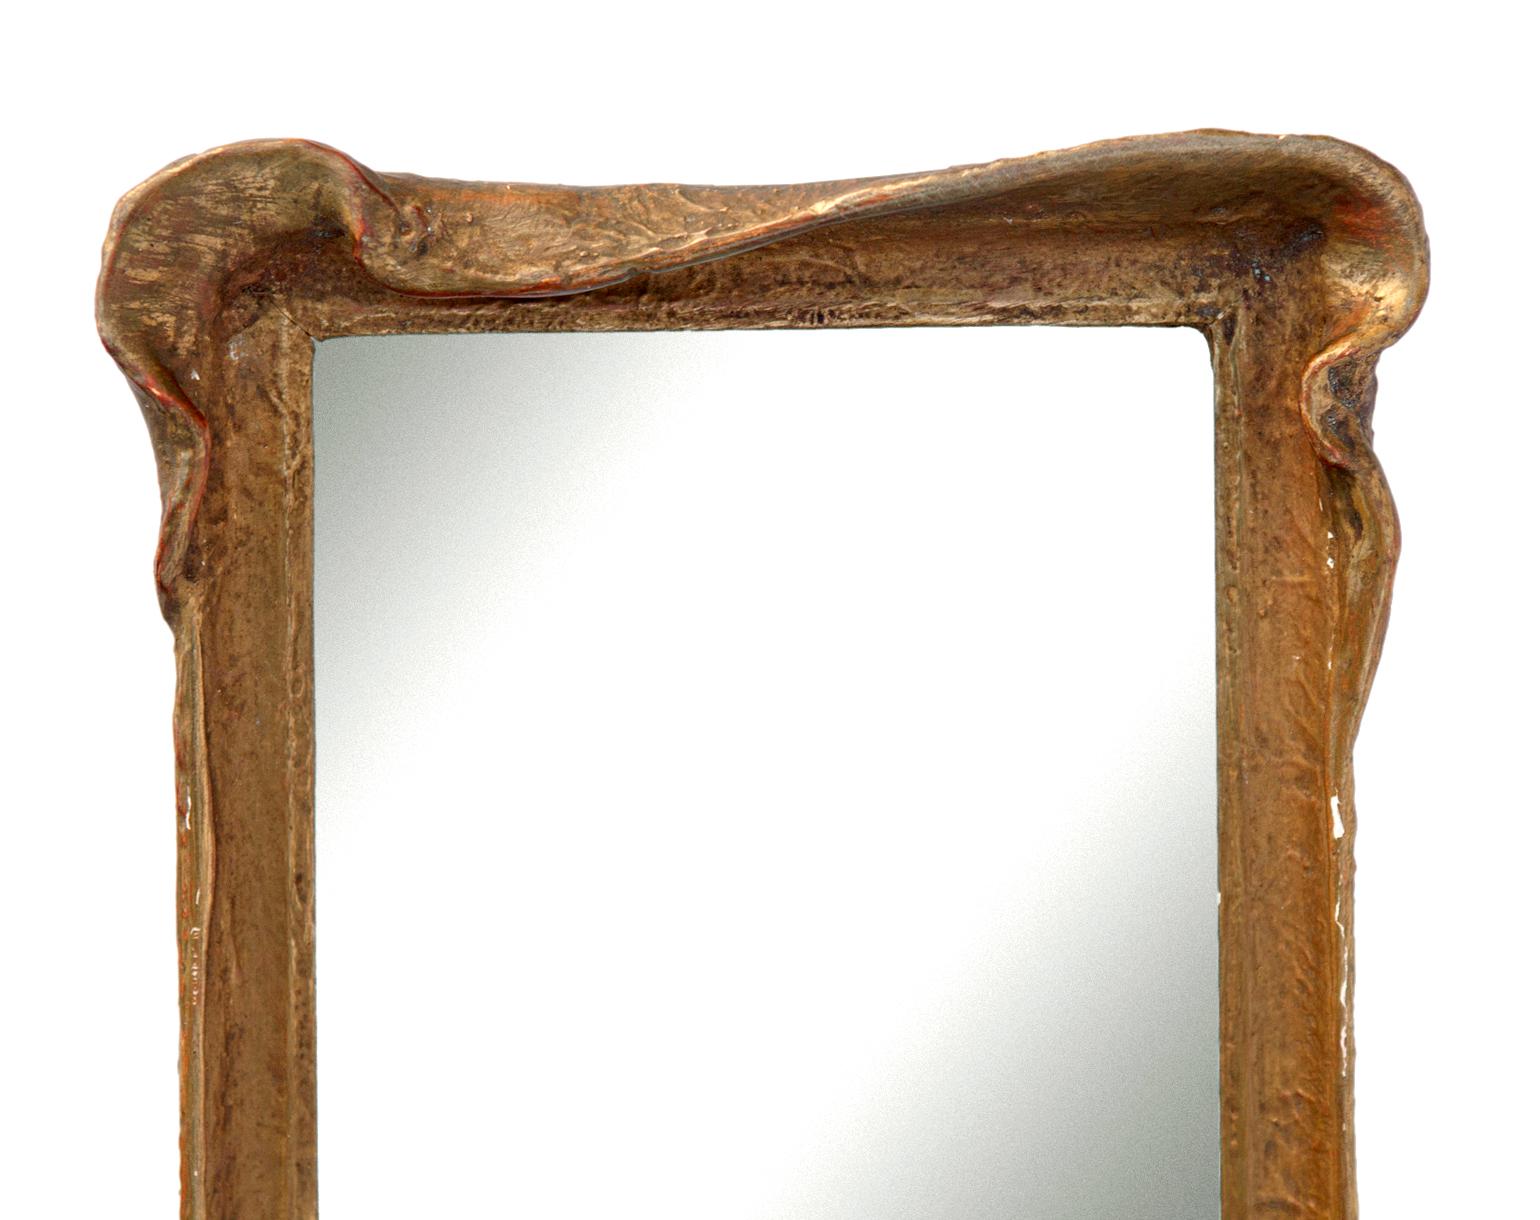 Rare, unusual hand sculpted batwing frame often referred to as 